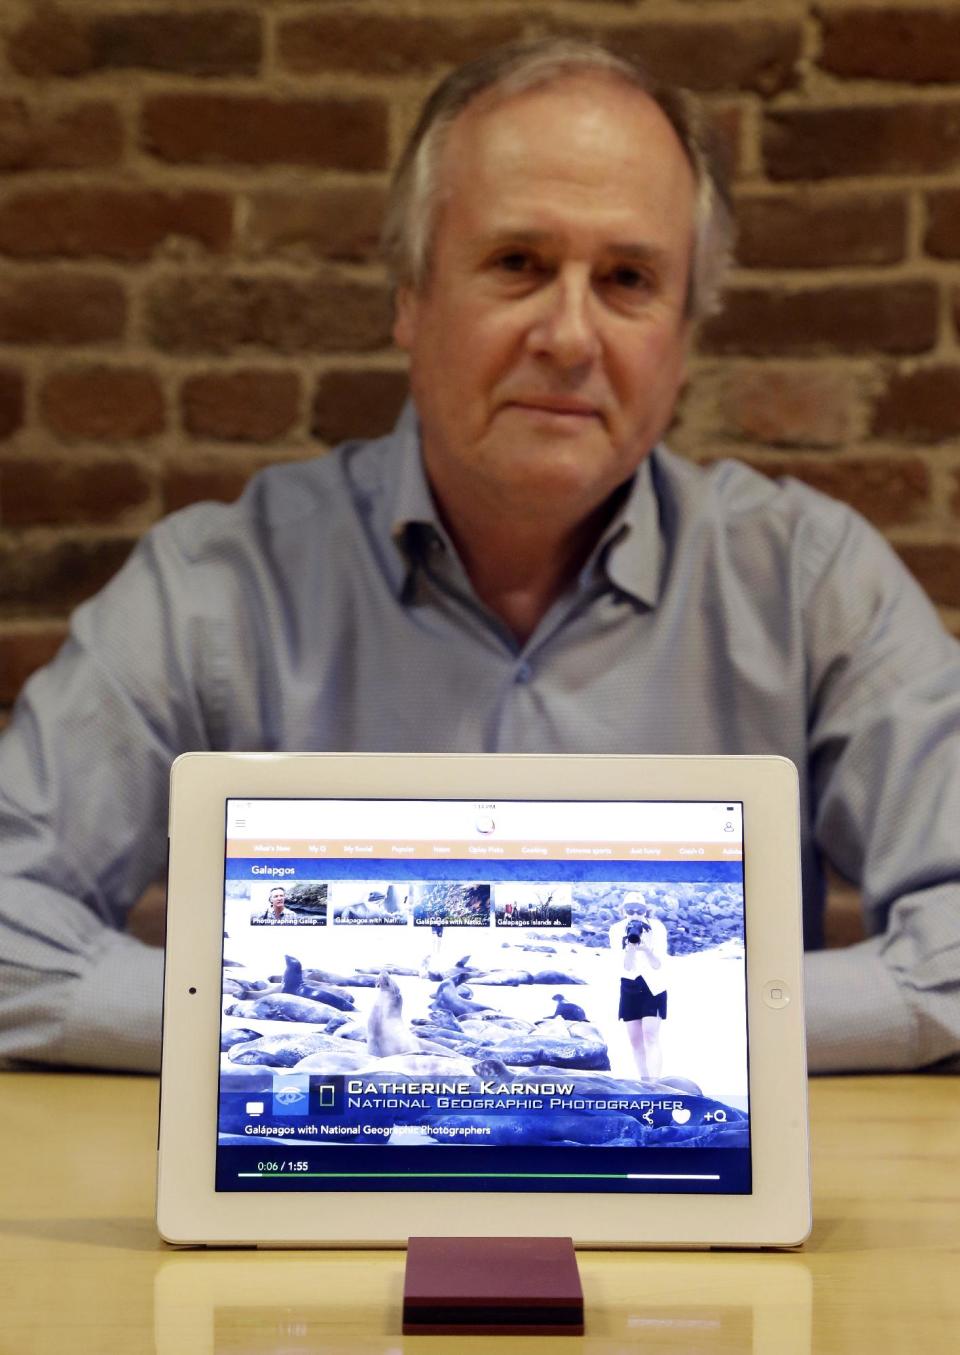 In this Friday, Feb. 21, 2014, photo, Mike Ramsay, CEO of Qplay, poses for photographs after giving a demonstration of Qplay on a tablet device in San Francisco. (AP Photo/Jeff Chiu)